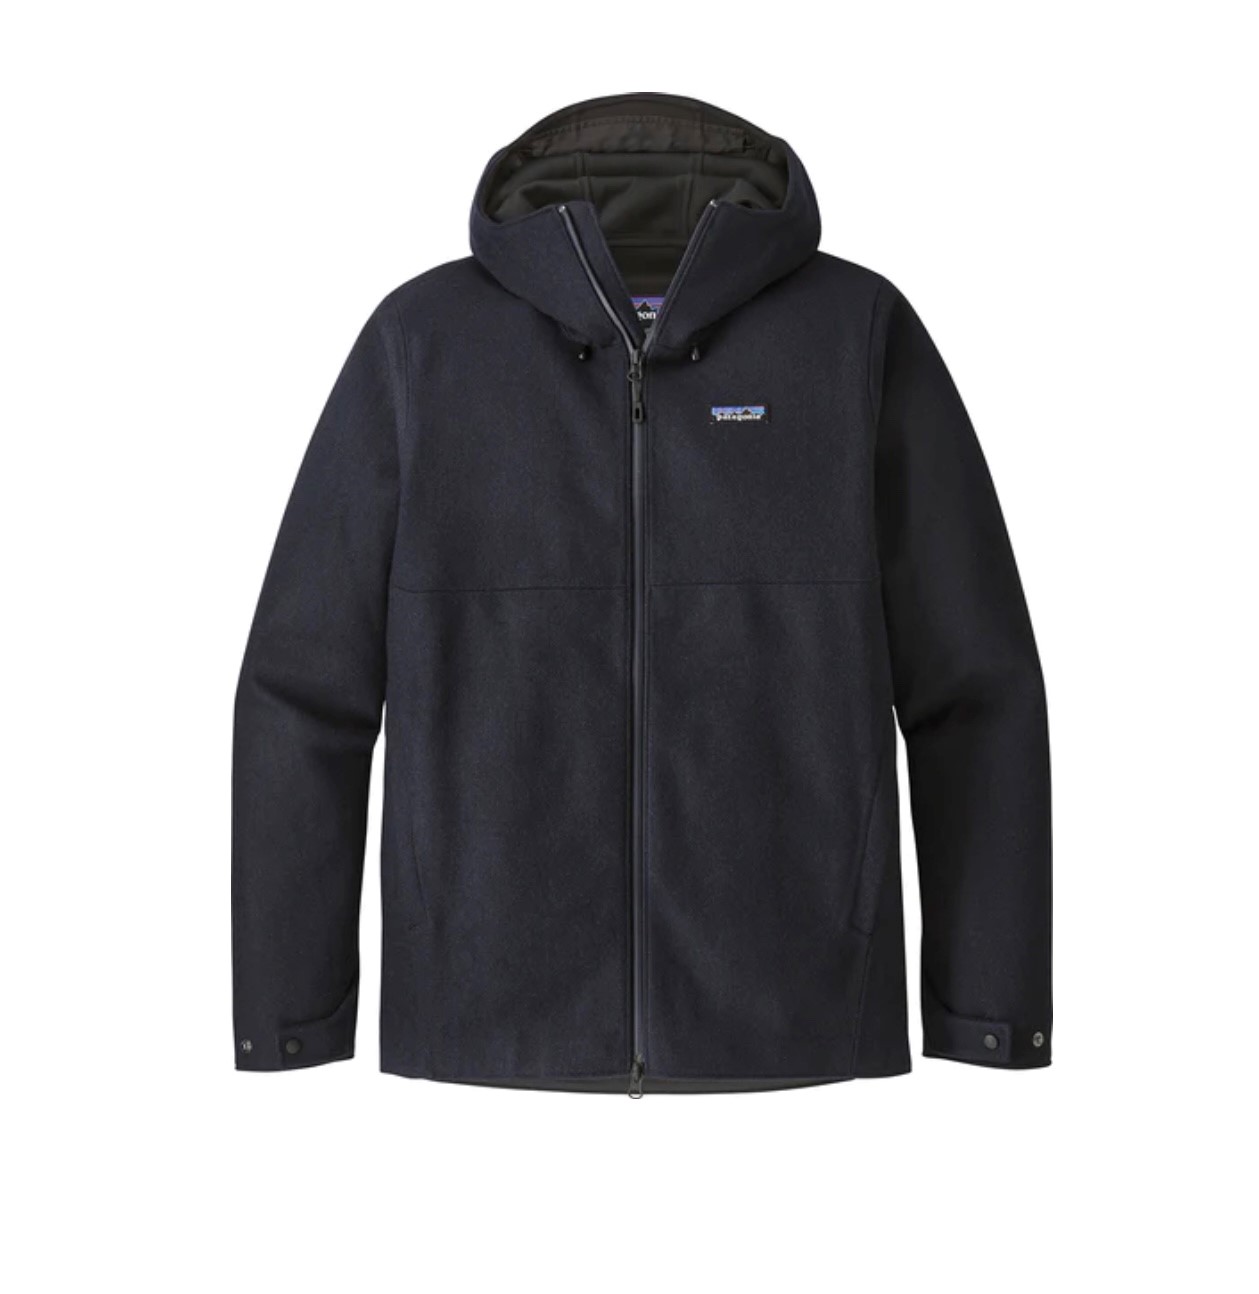 Patagonia M's Recycled Wool Jacket - Classic Navy - Large